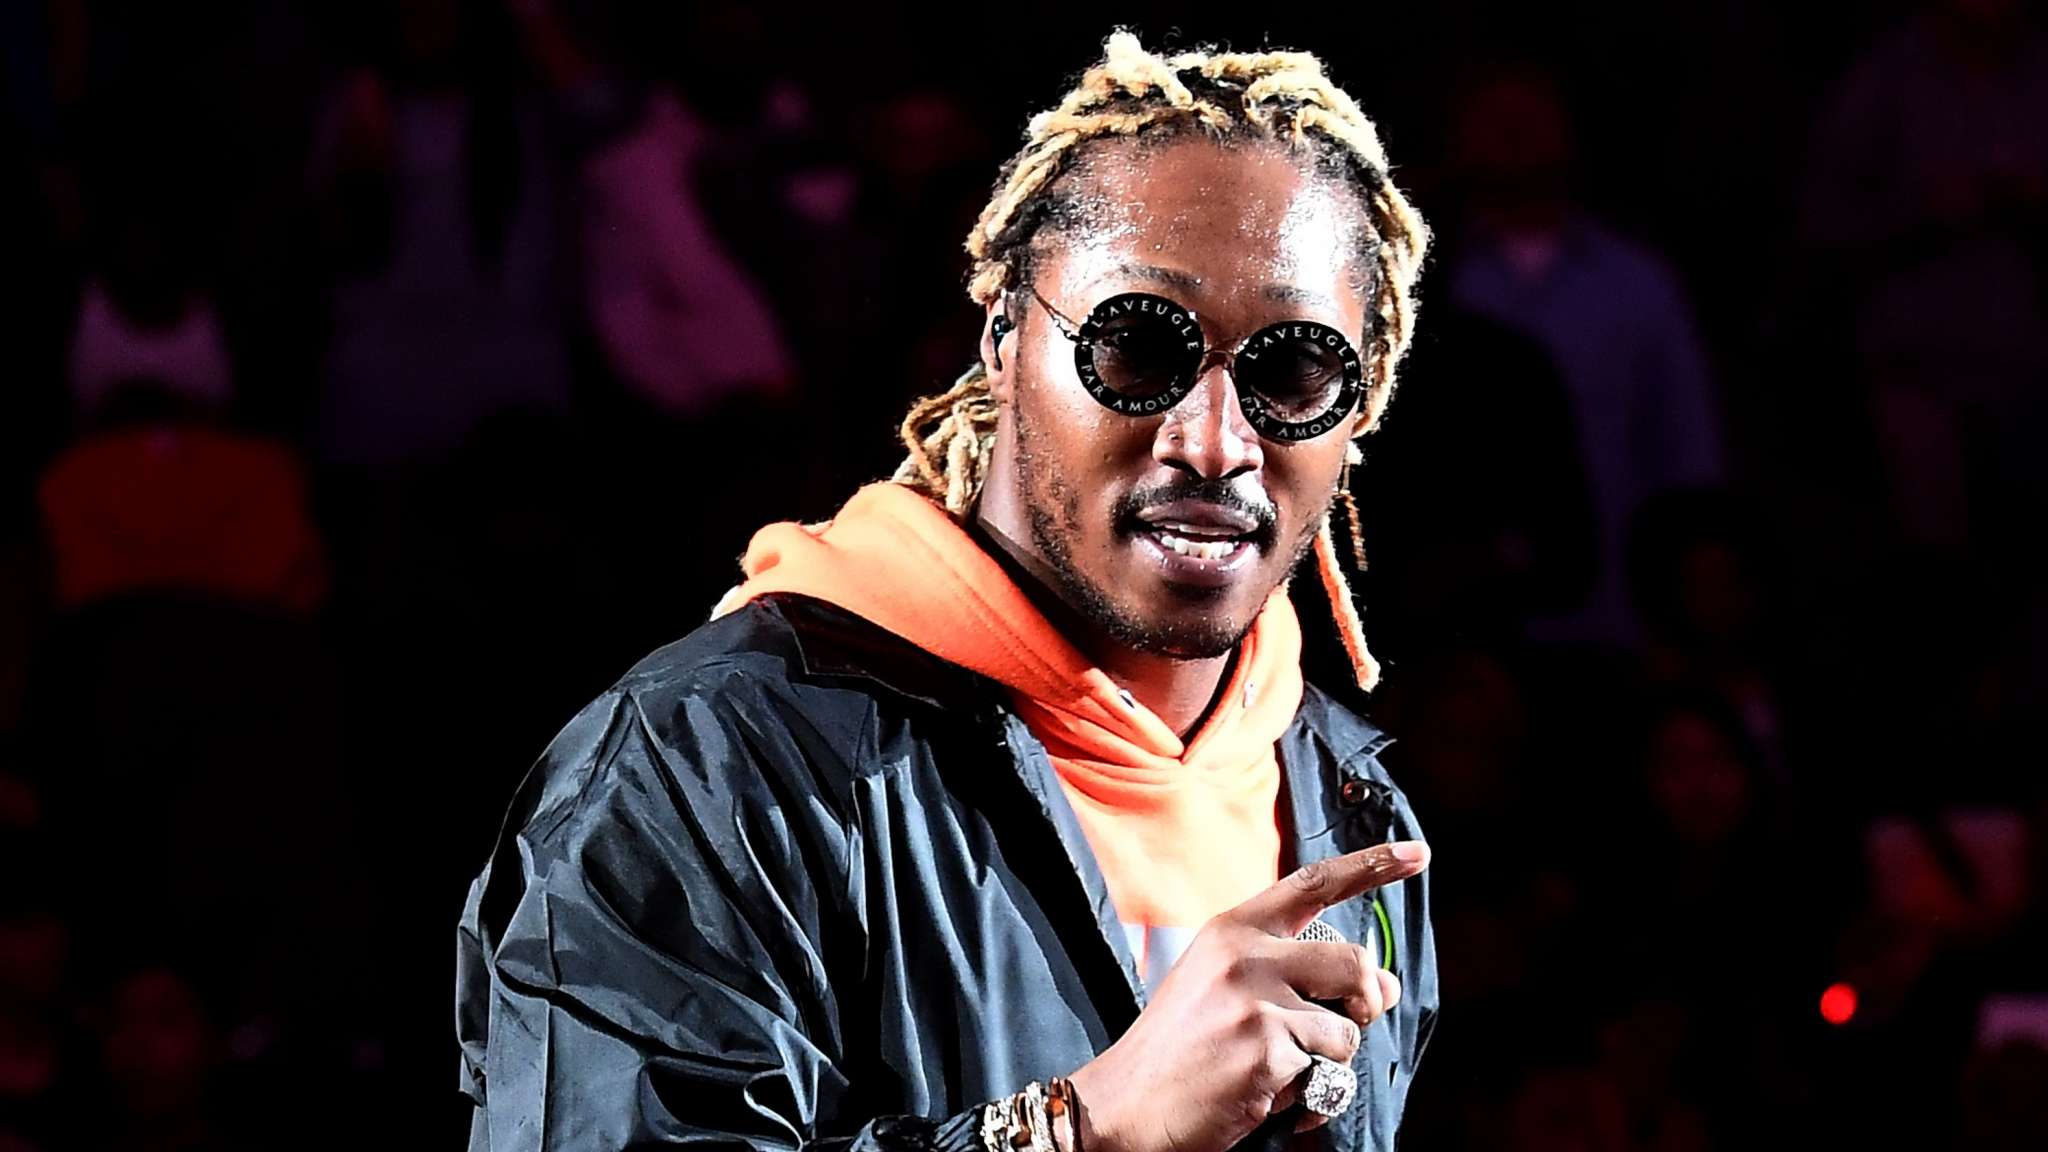 Future's Babies Are Already 'Flexin' It On The Gram' And Fans Criticize Him